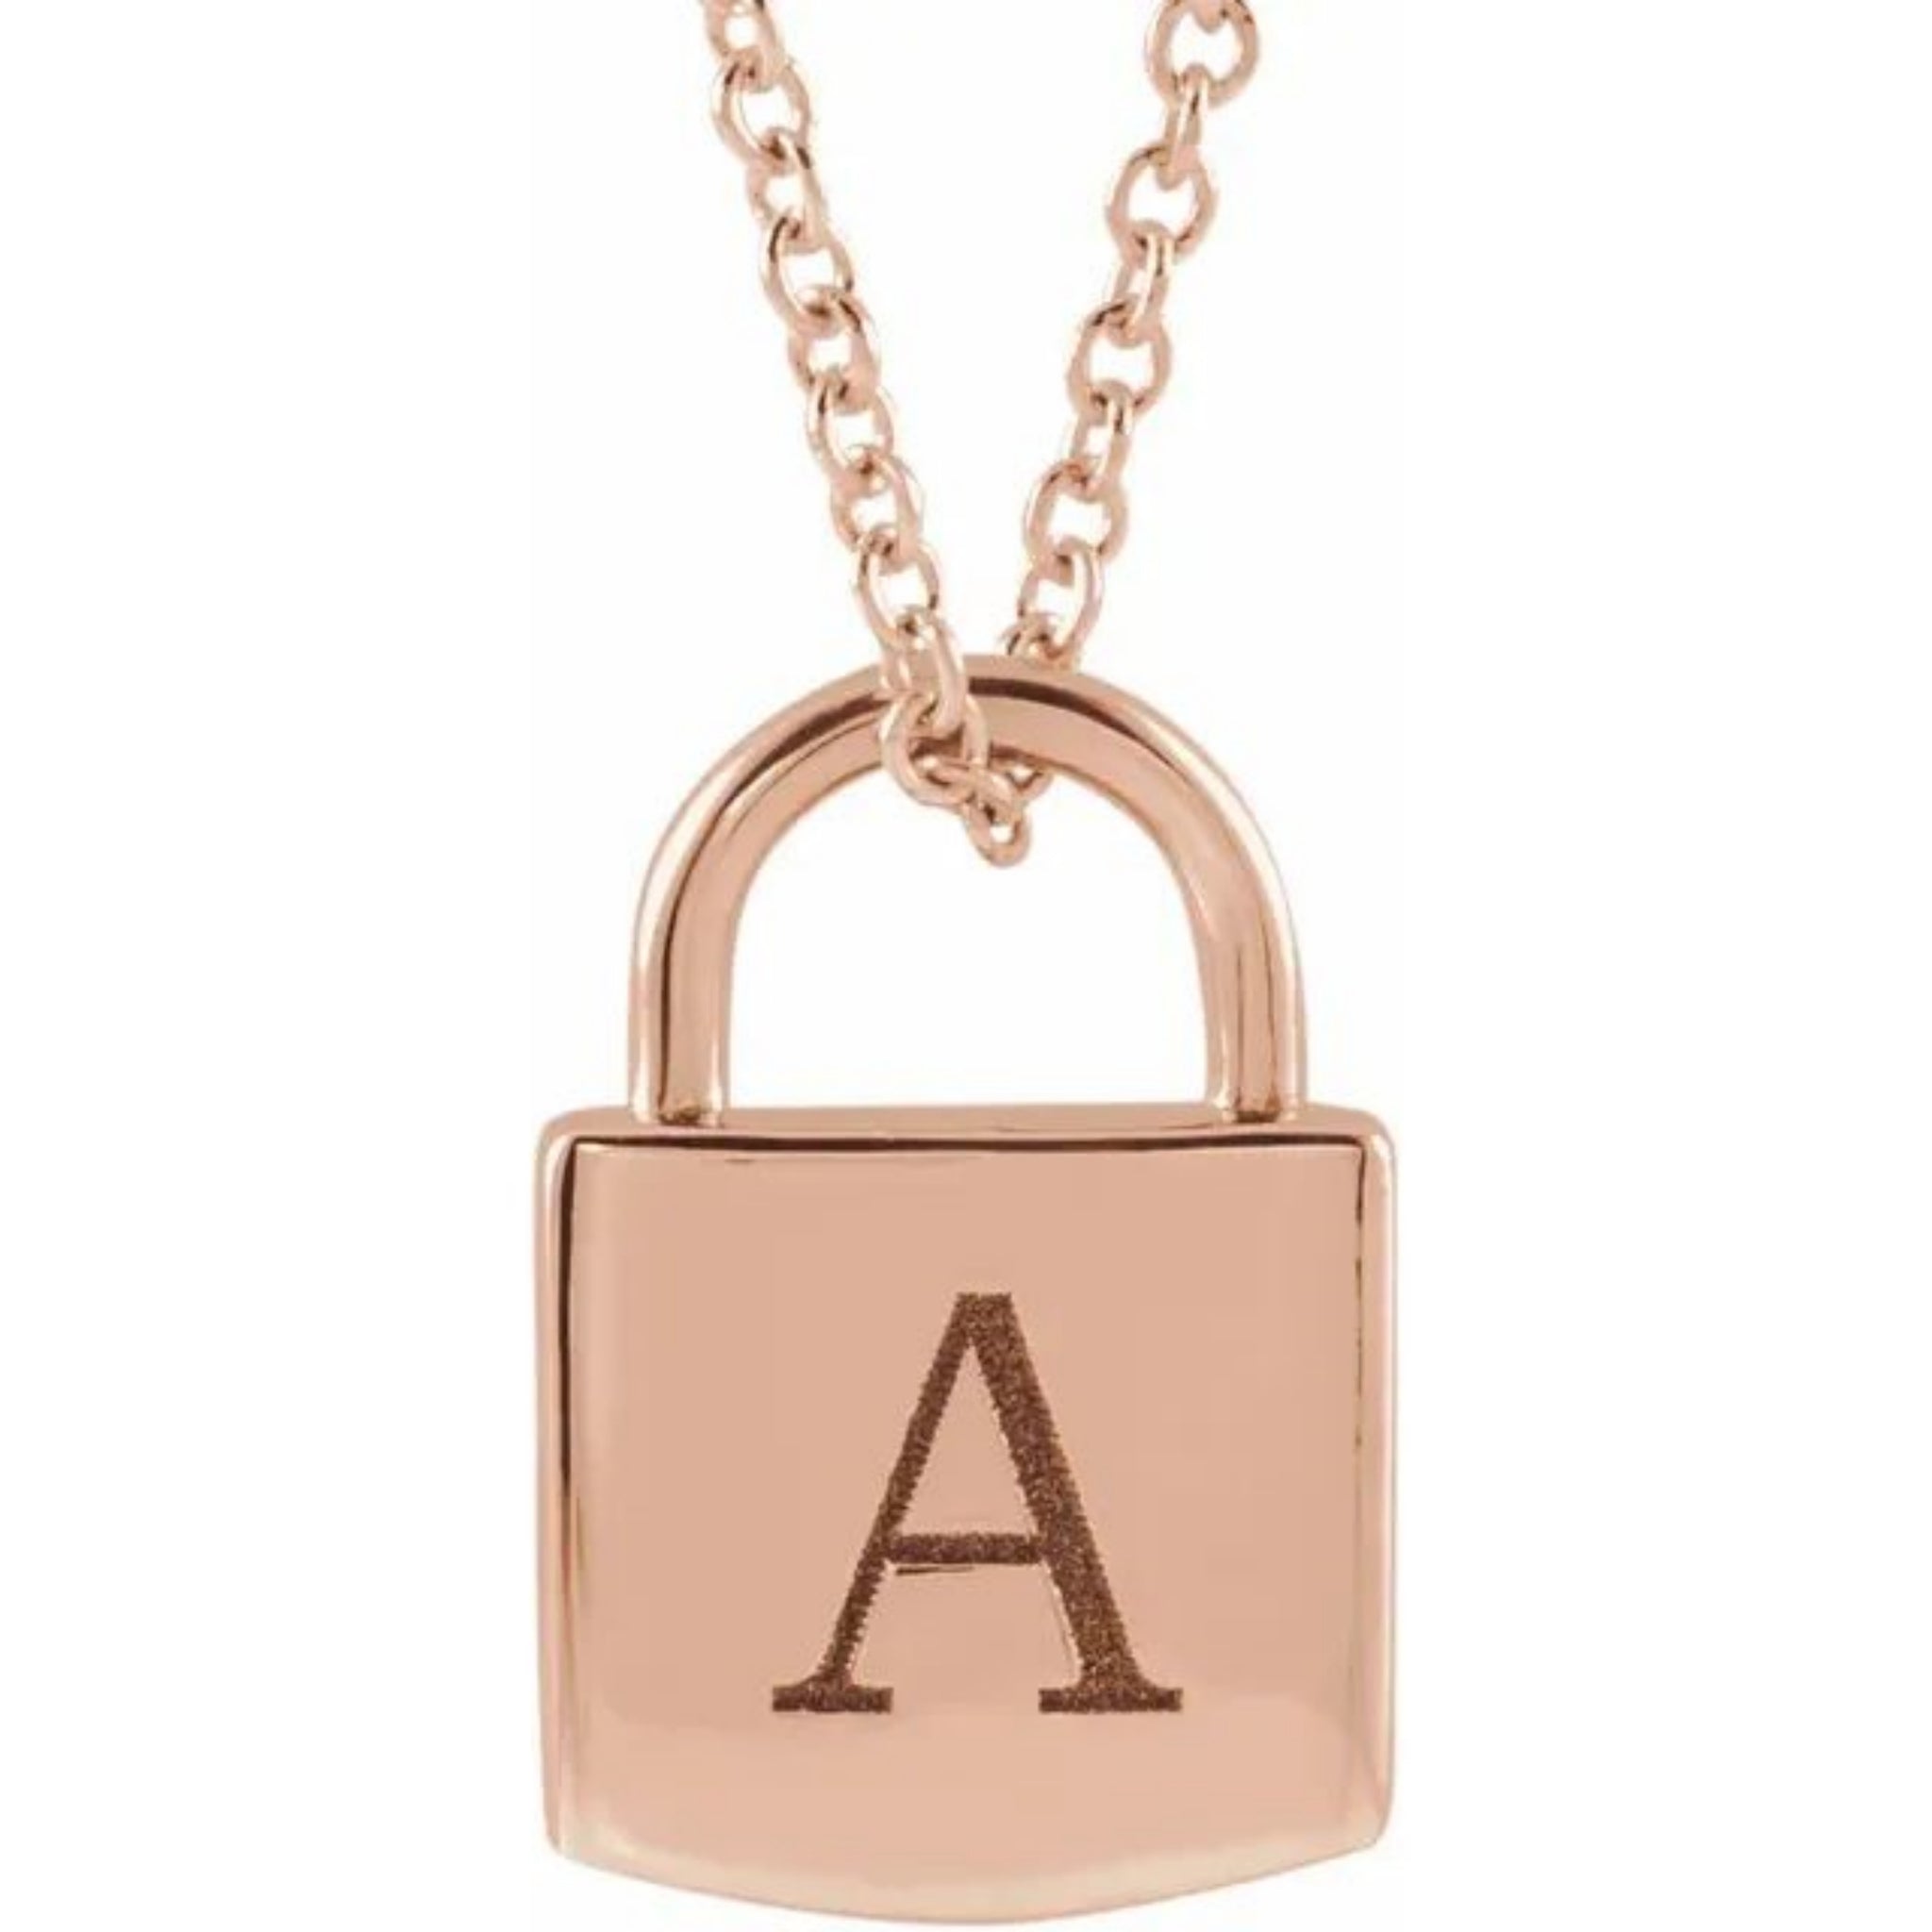 Vintage Old English Letters A-Z Engraved Padlock Pendant Initial Necklace  Stainless Steel Chain Lock Gold Jewelry For Women Gift